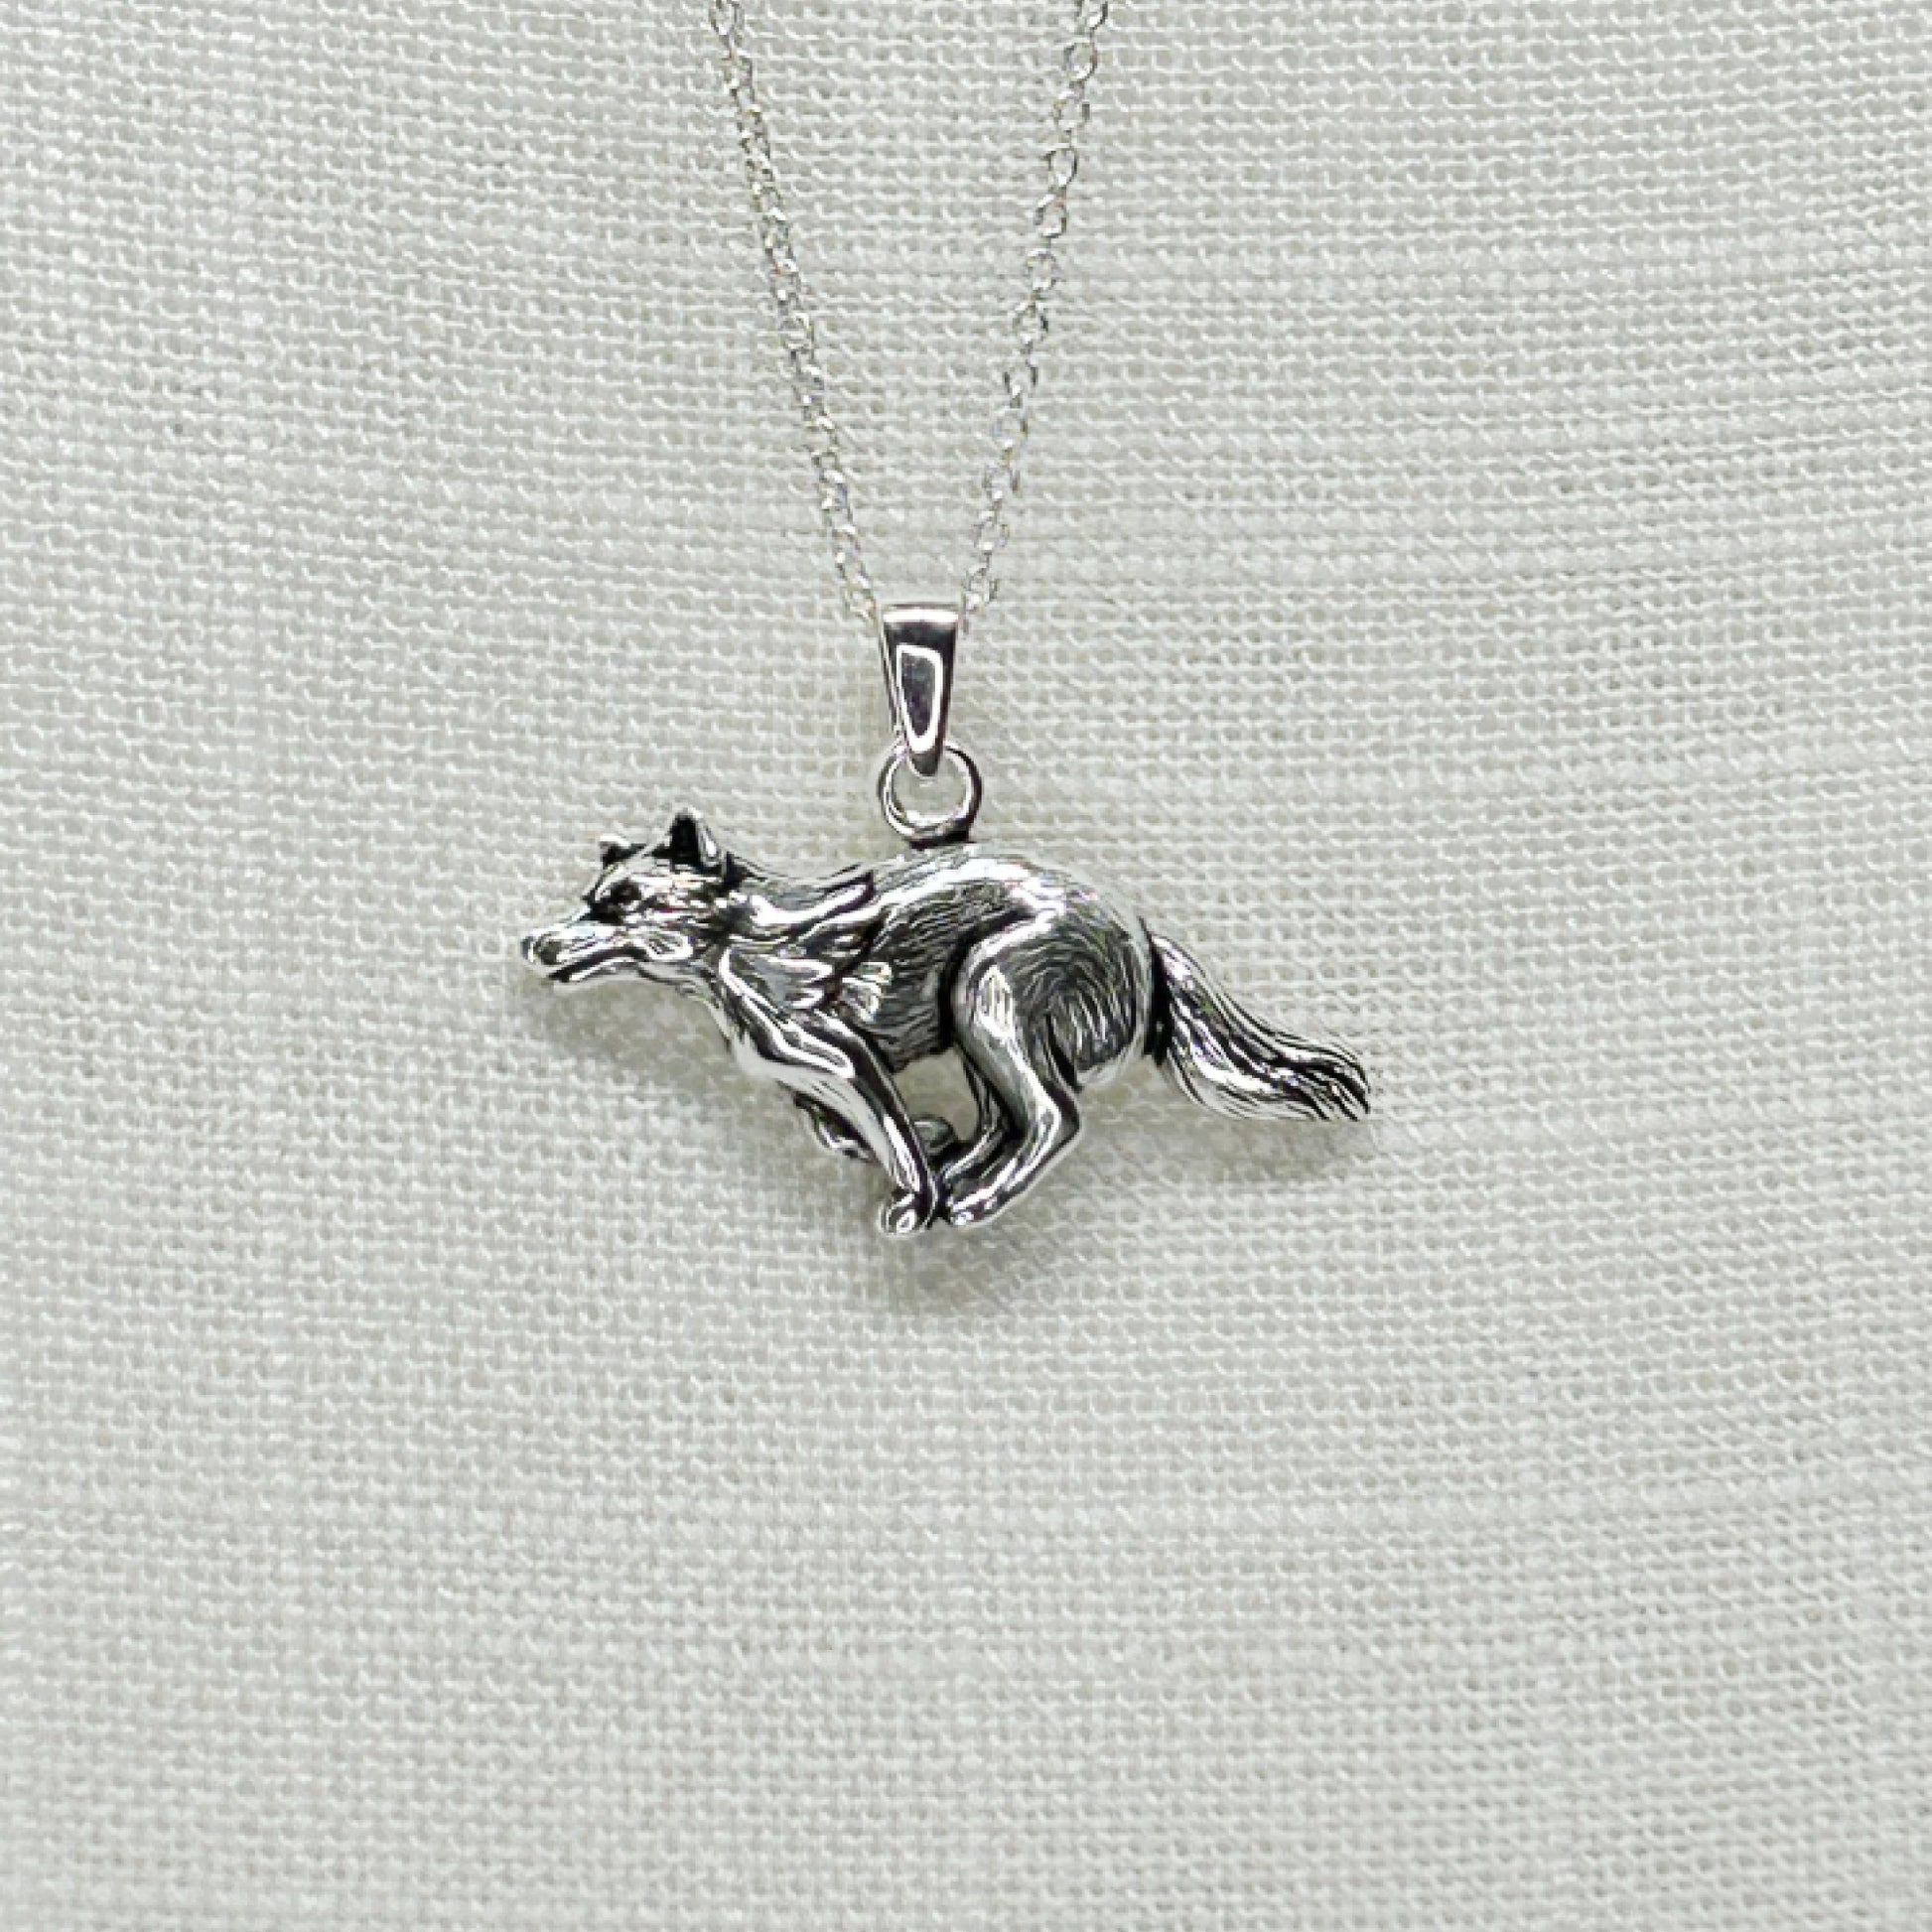 This beautiful heavier weight wolf familiar looks as though he is running, maybe to join the rest of his pack! He has a bushy tail and has been slightly oxidized to show off the detail of his fur. The pendant is approx 3cm long by 2.1cm high including bale and comes supplied on an 18 inch sterling silver cable chain. All jewellery comes gift boxed.